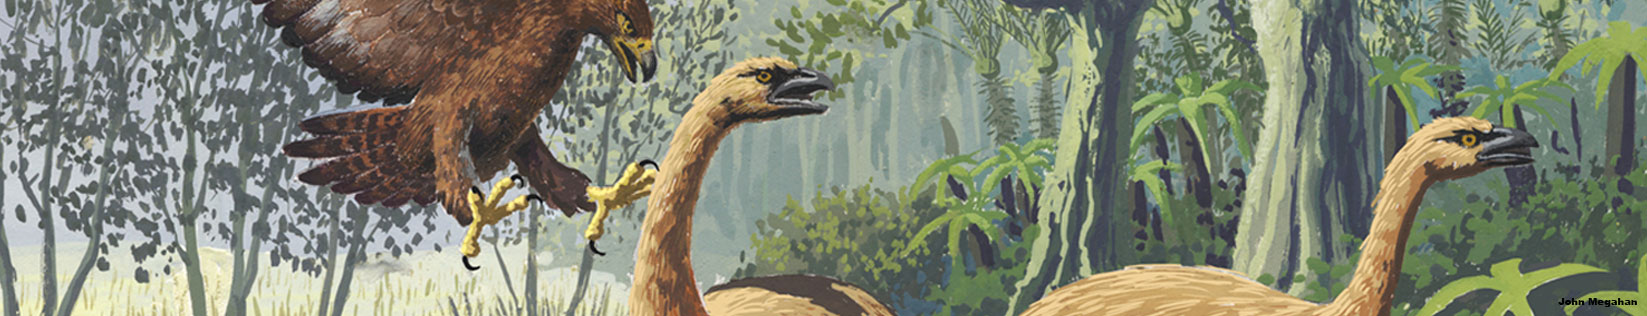 Illustration of a Haast's Eagle attacking a Moa